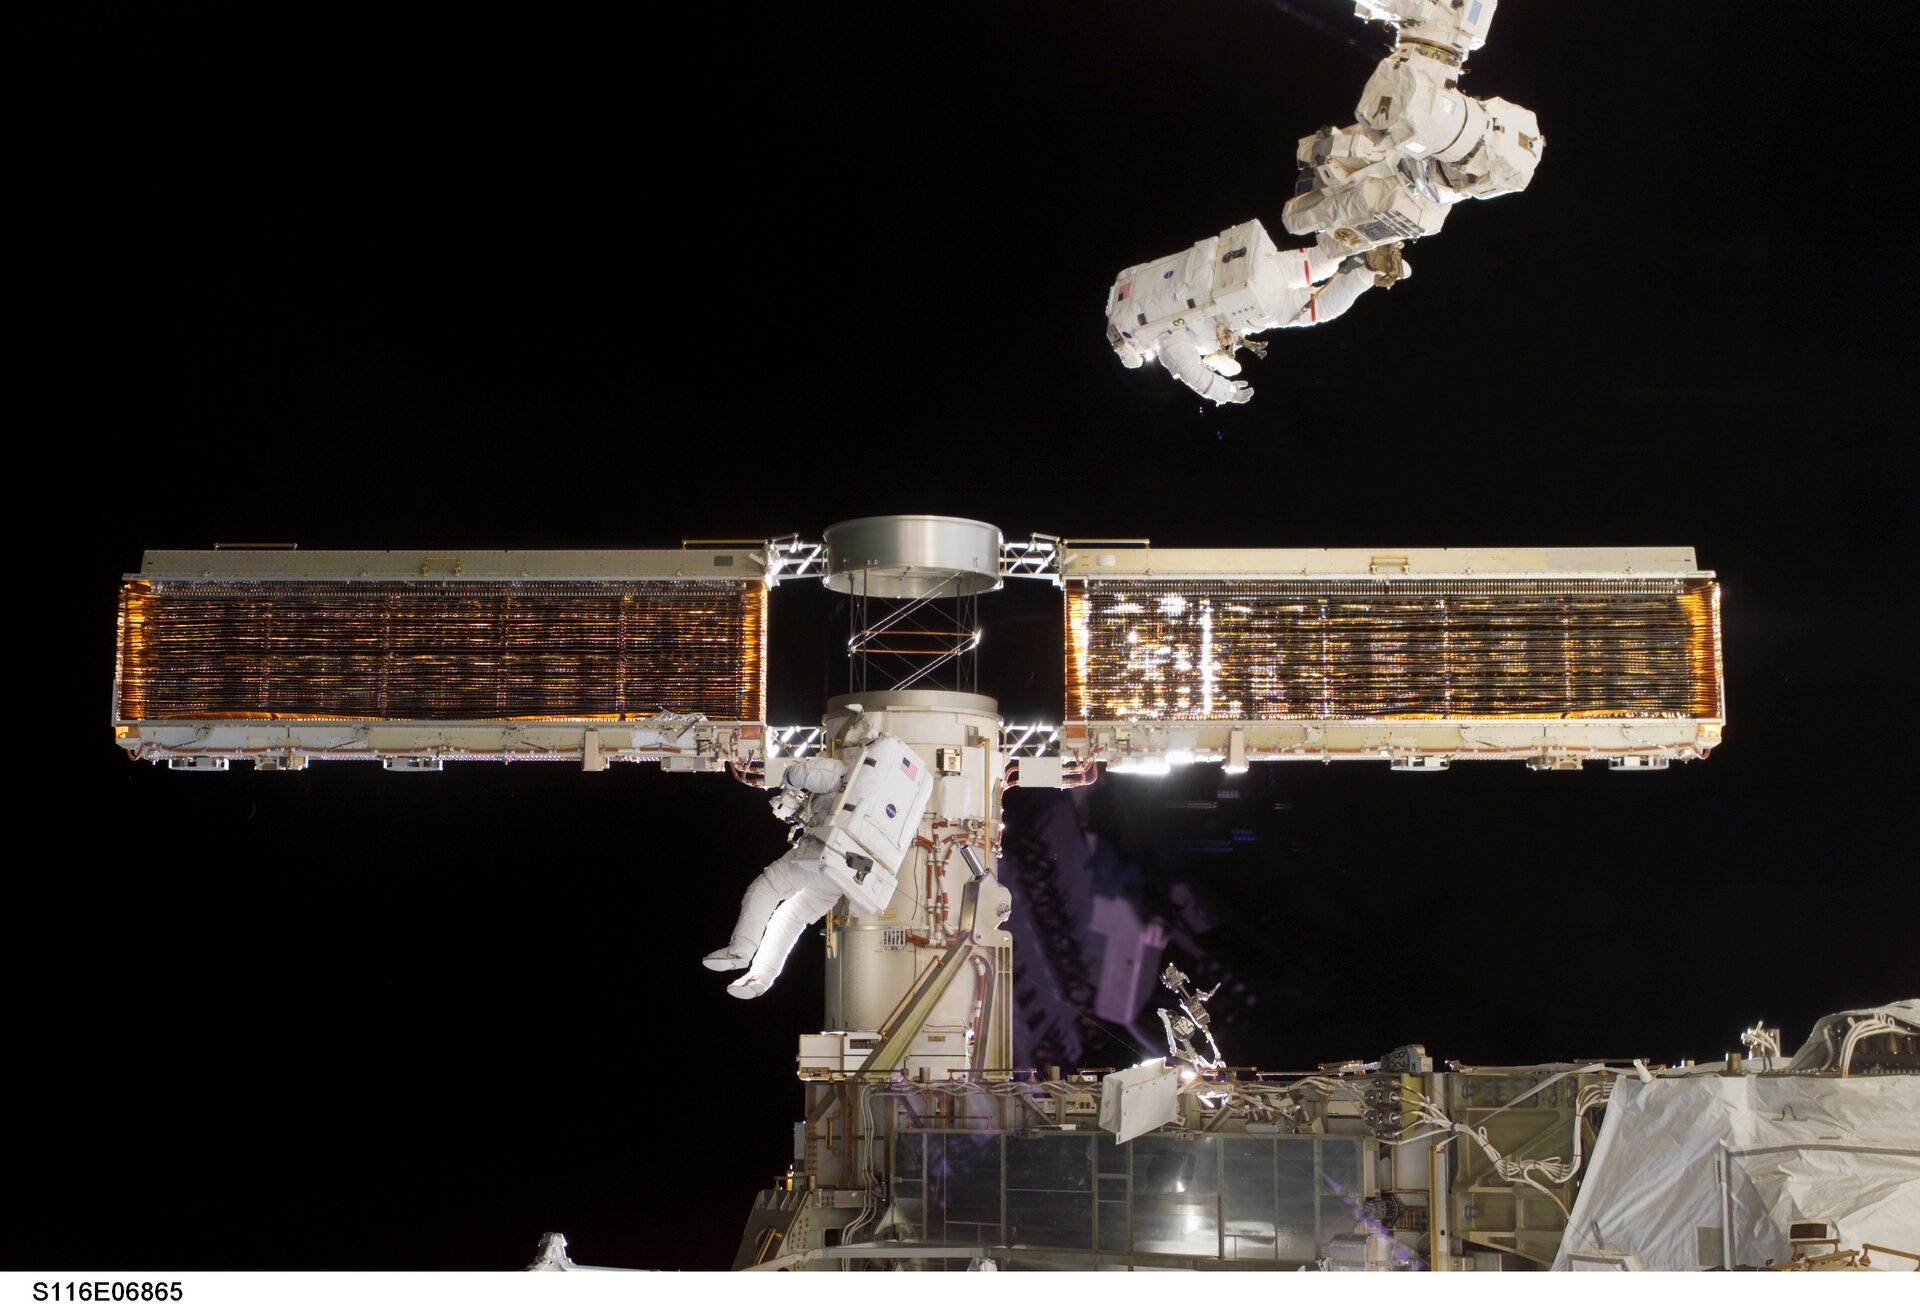 The P6 solar array is successfully retracted following an extra spacewalk